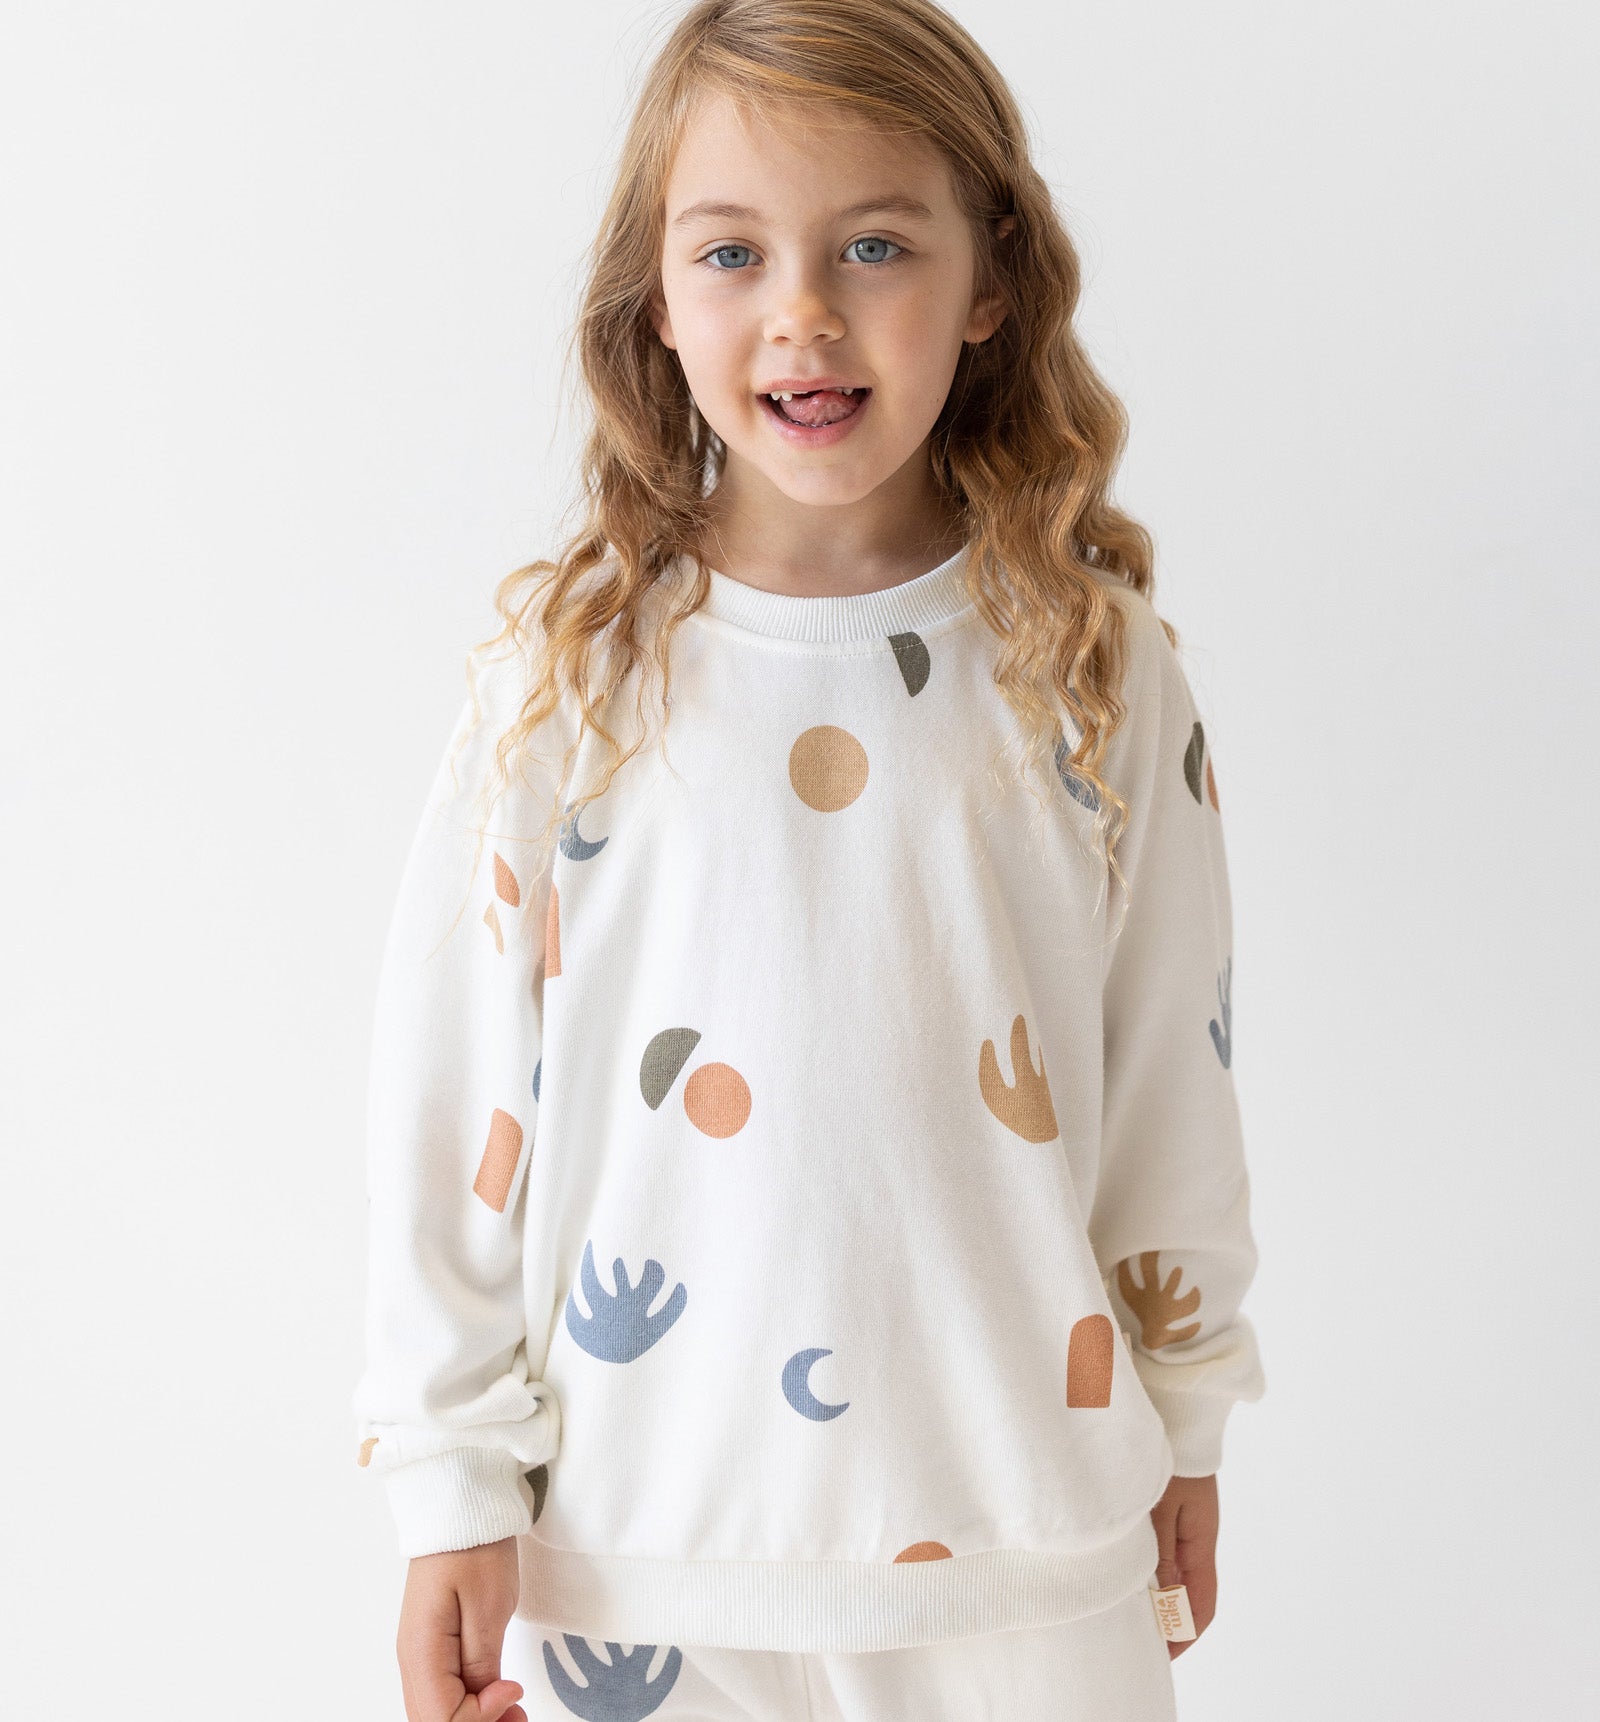 Elements printed sweater. White Bamboo fleece jumper by Bam Loves boo